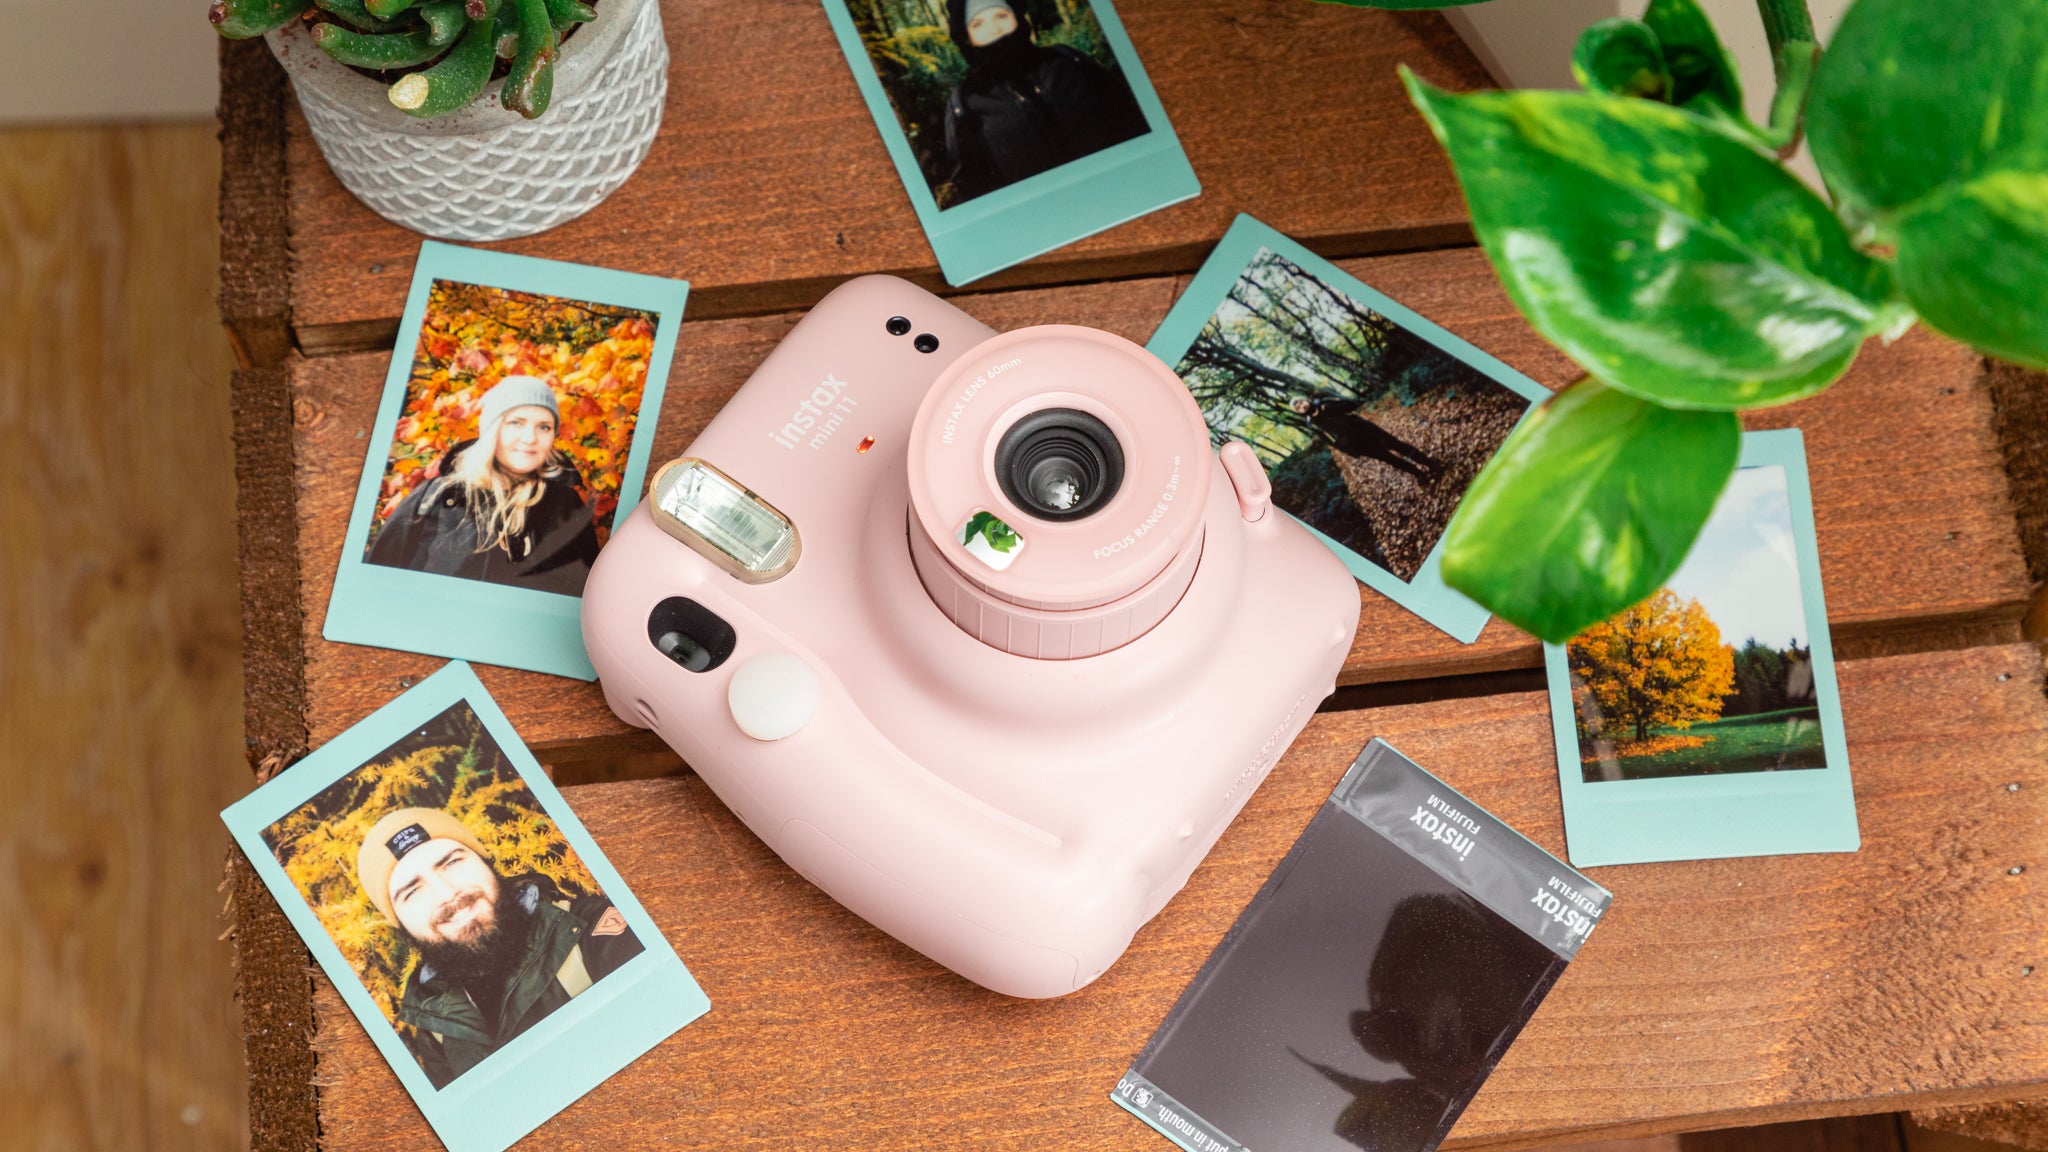 Instax Mini 11 review: A simple camera instant fun | Reviews